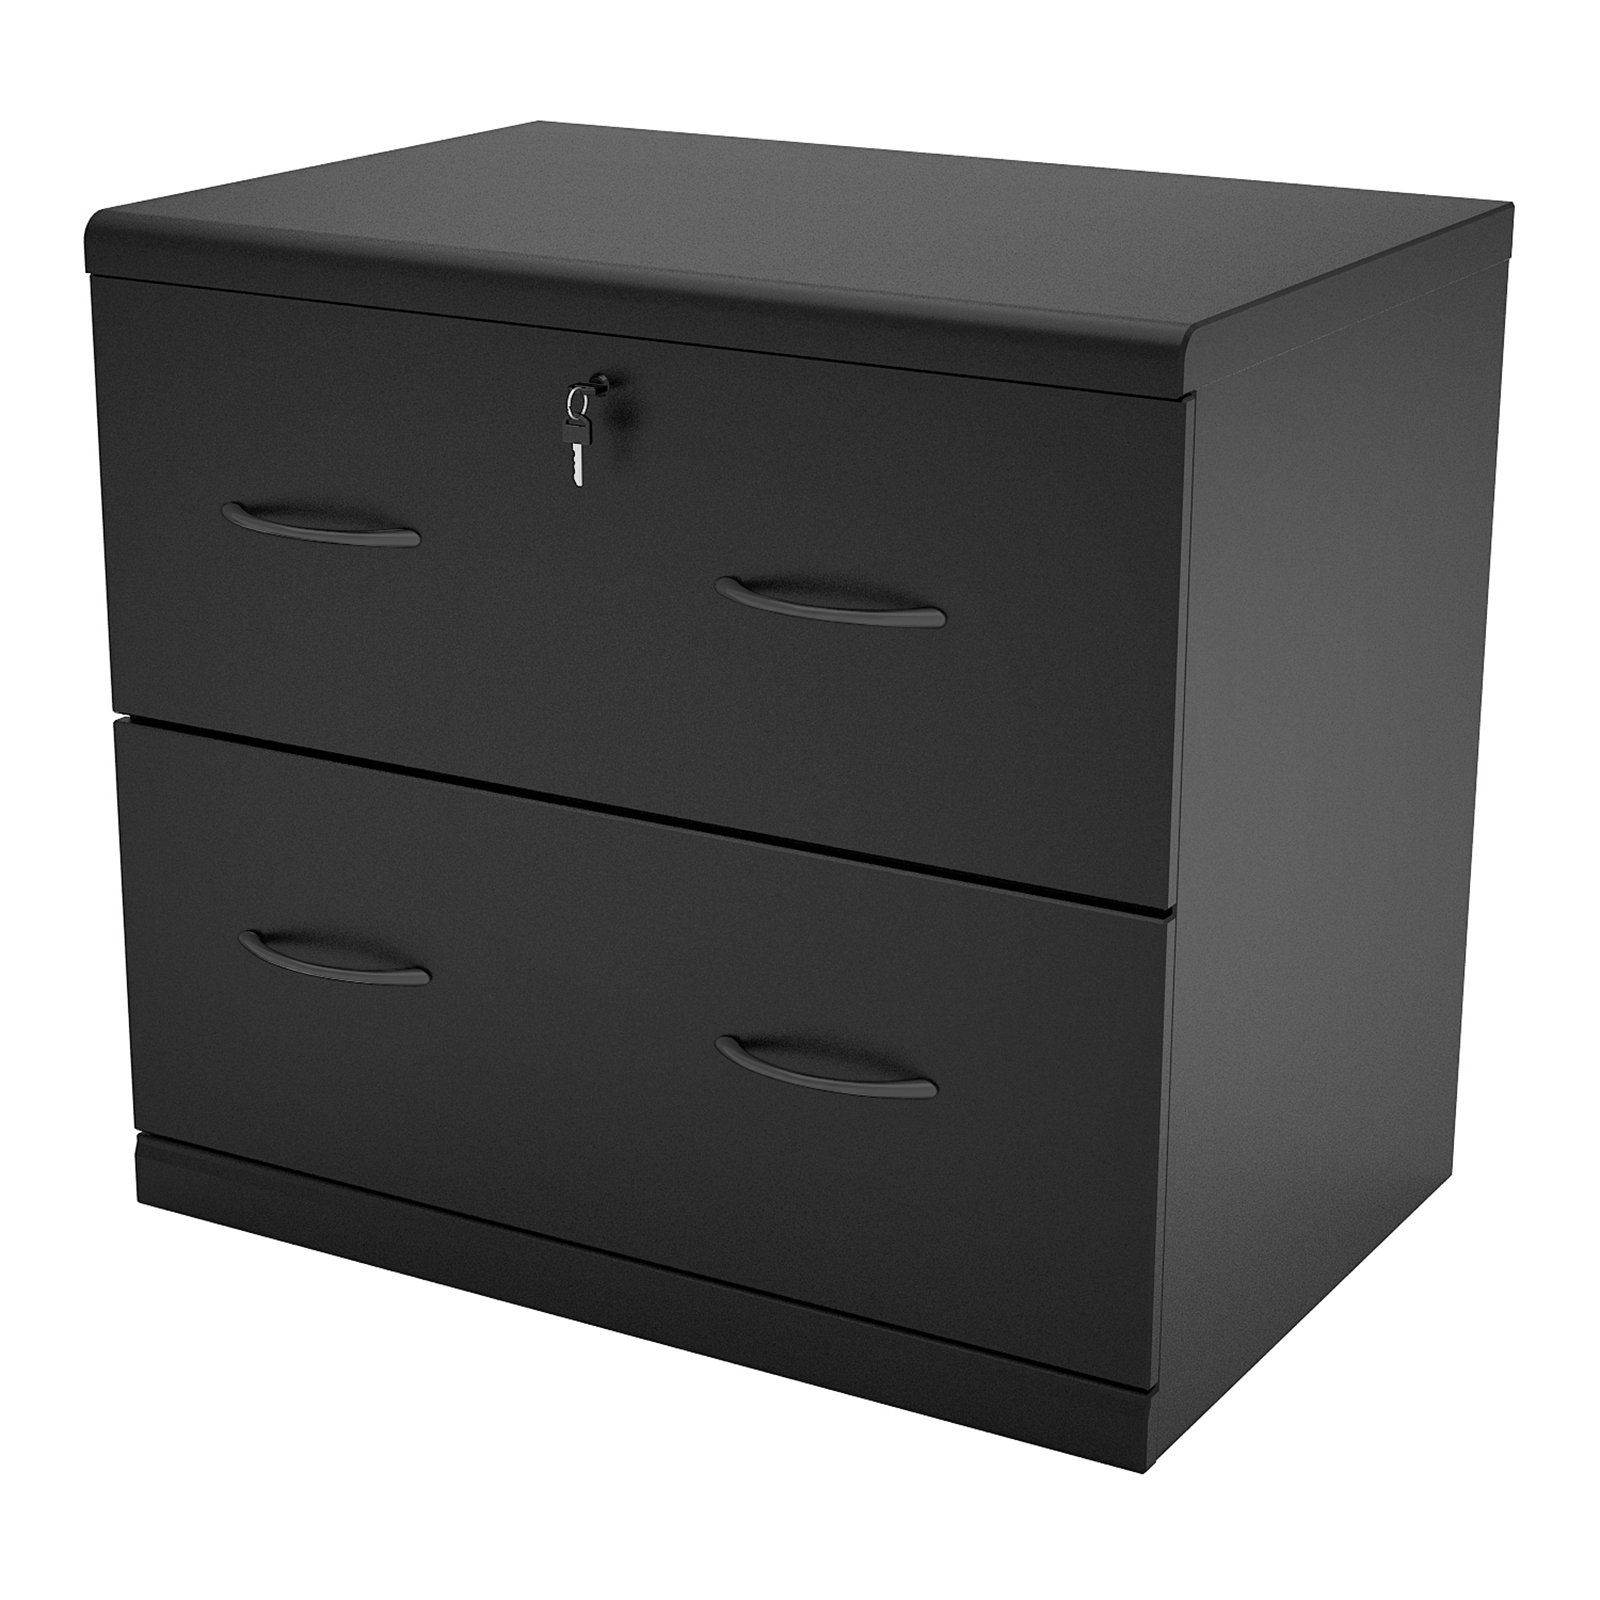 2 Drawer Lateral Wood Lockable Filing Cabinet Black Walmart with regard to sizing 1600 X 1600